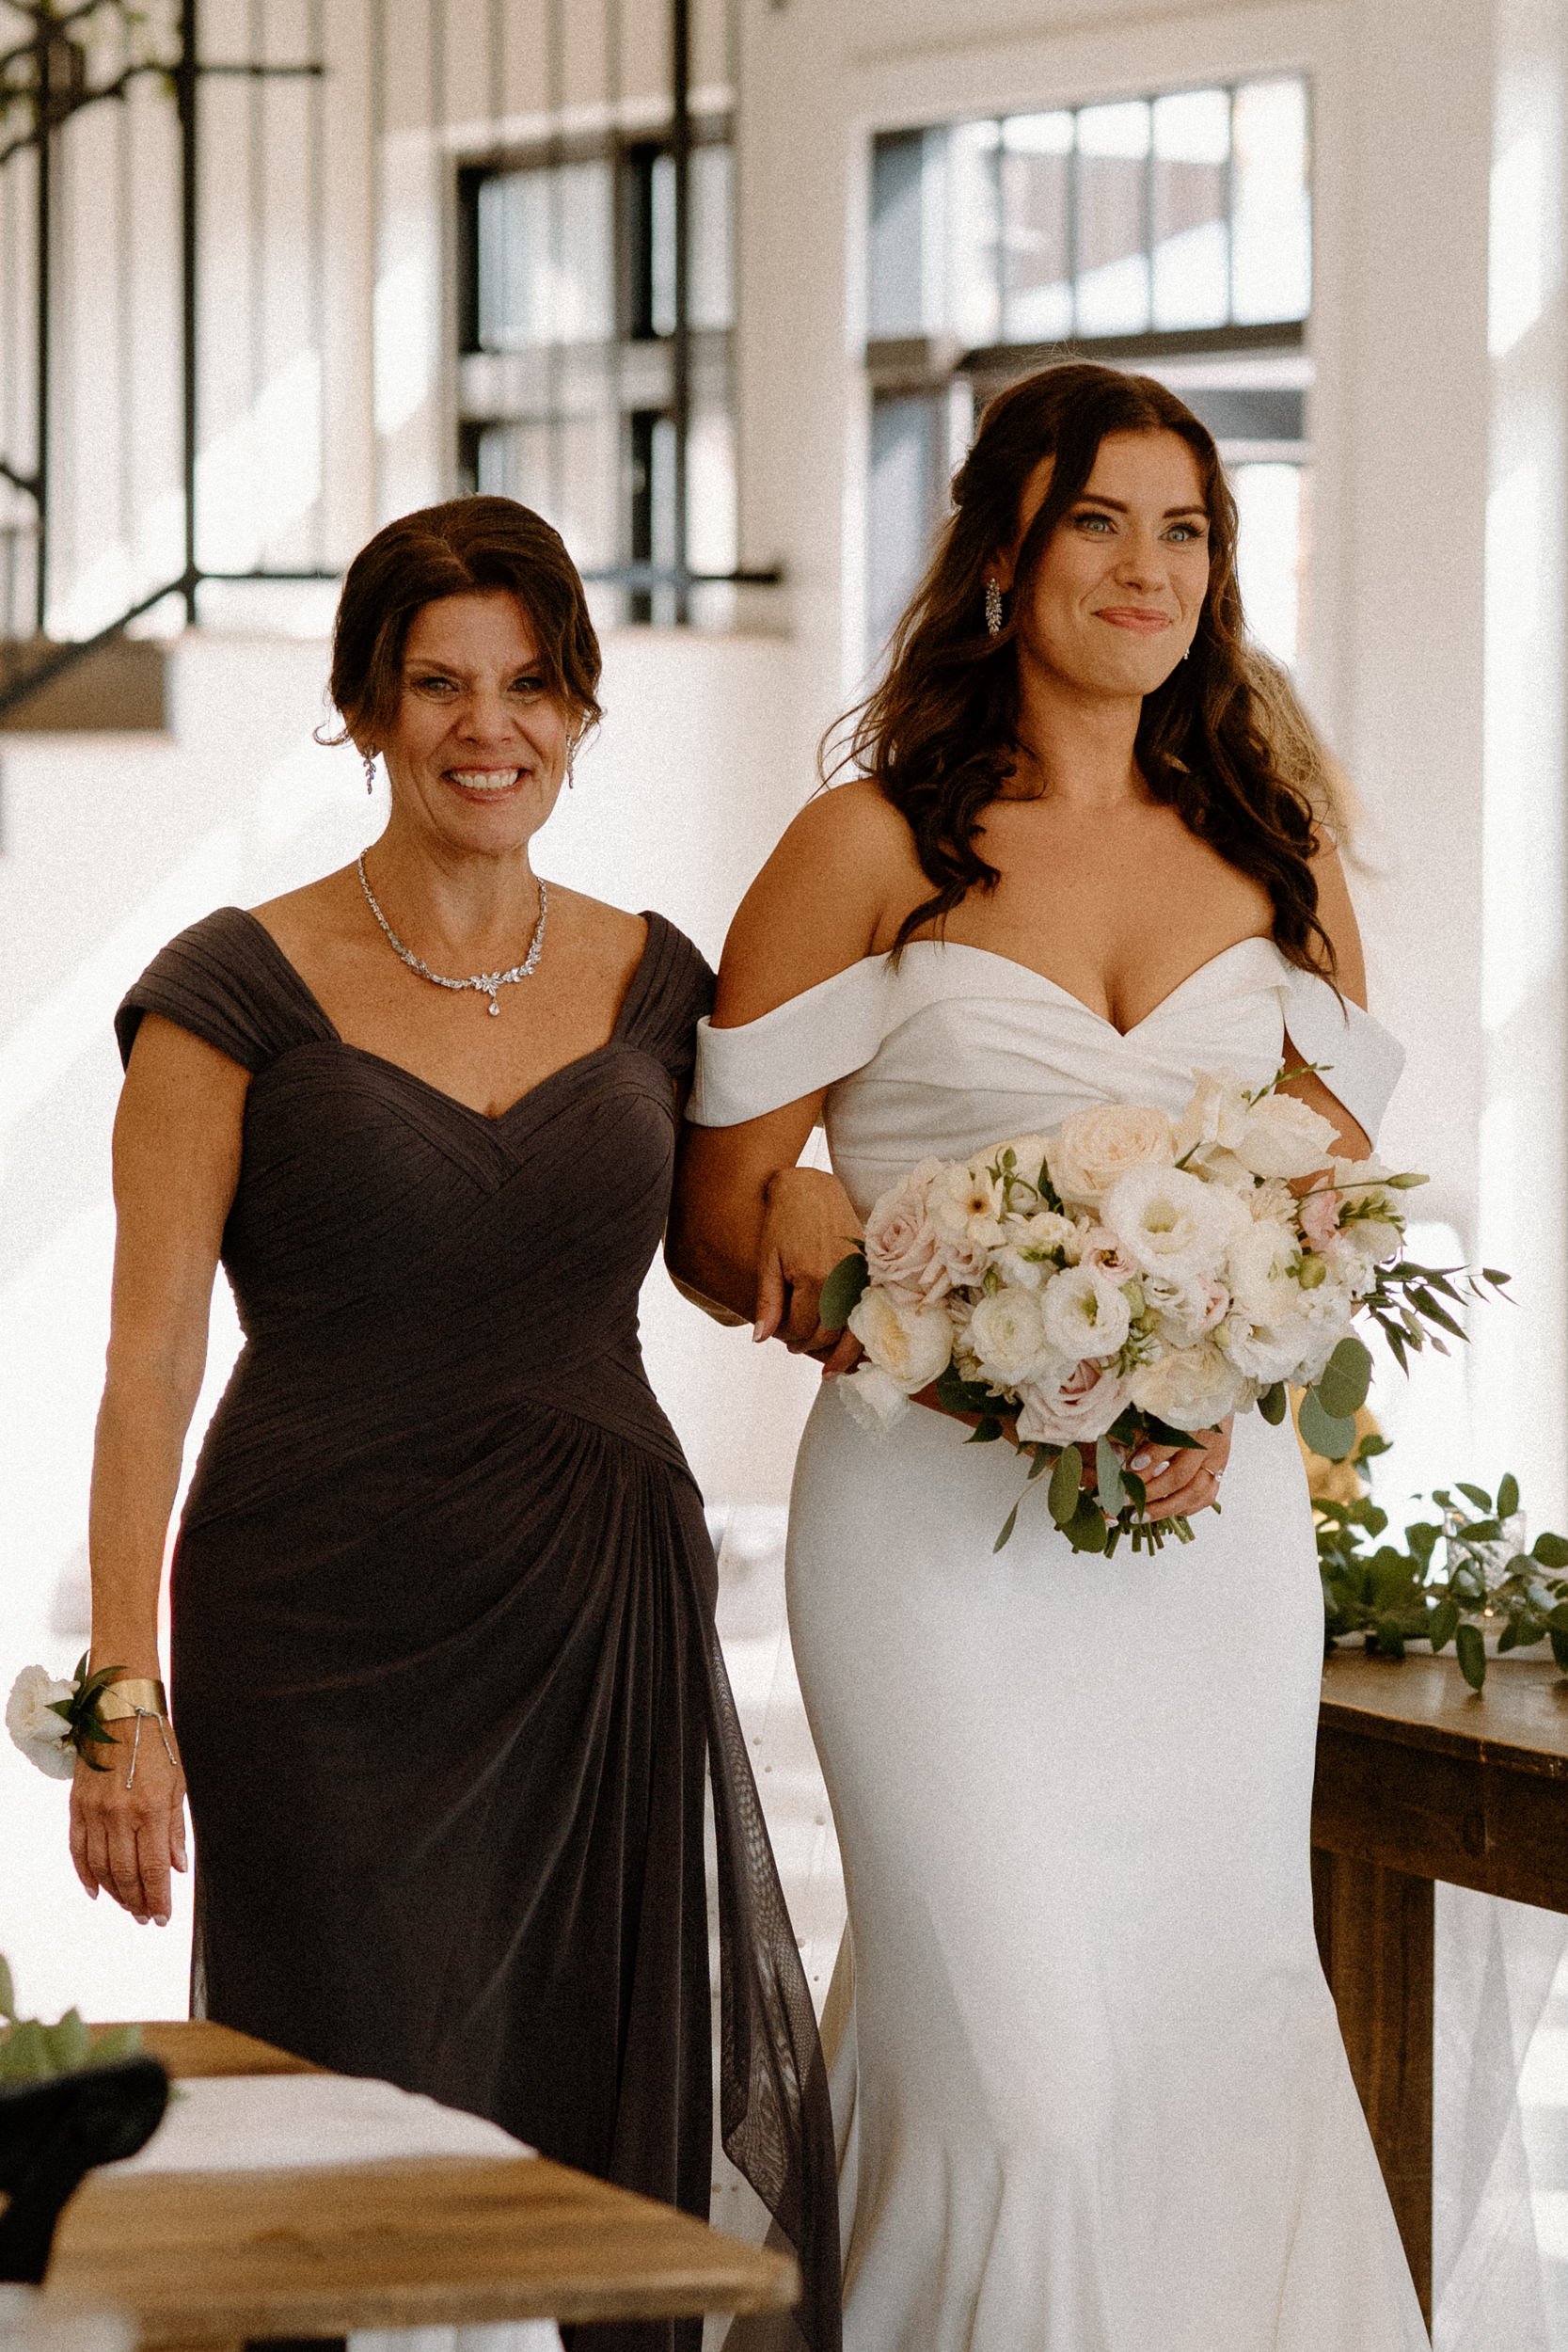 The bride and her mother walk down the aisle together